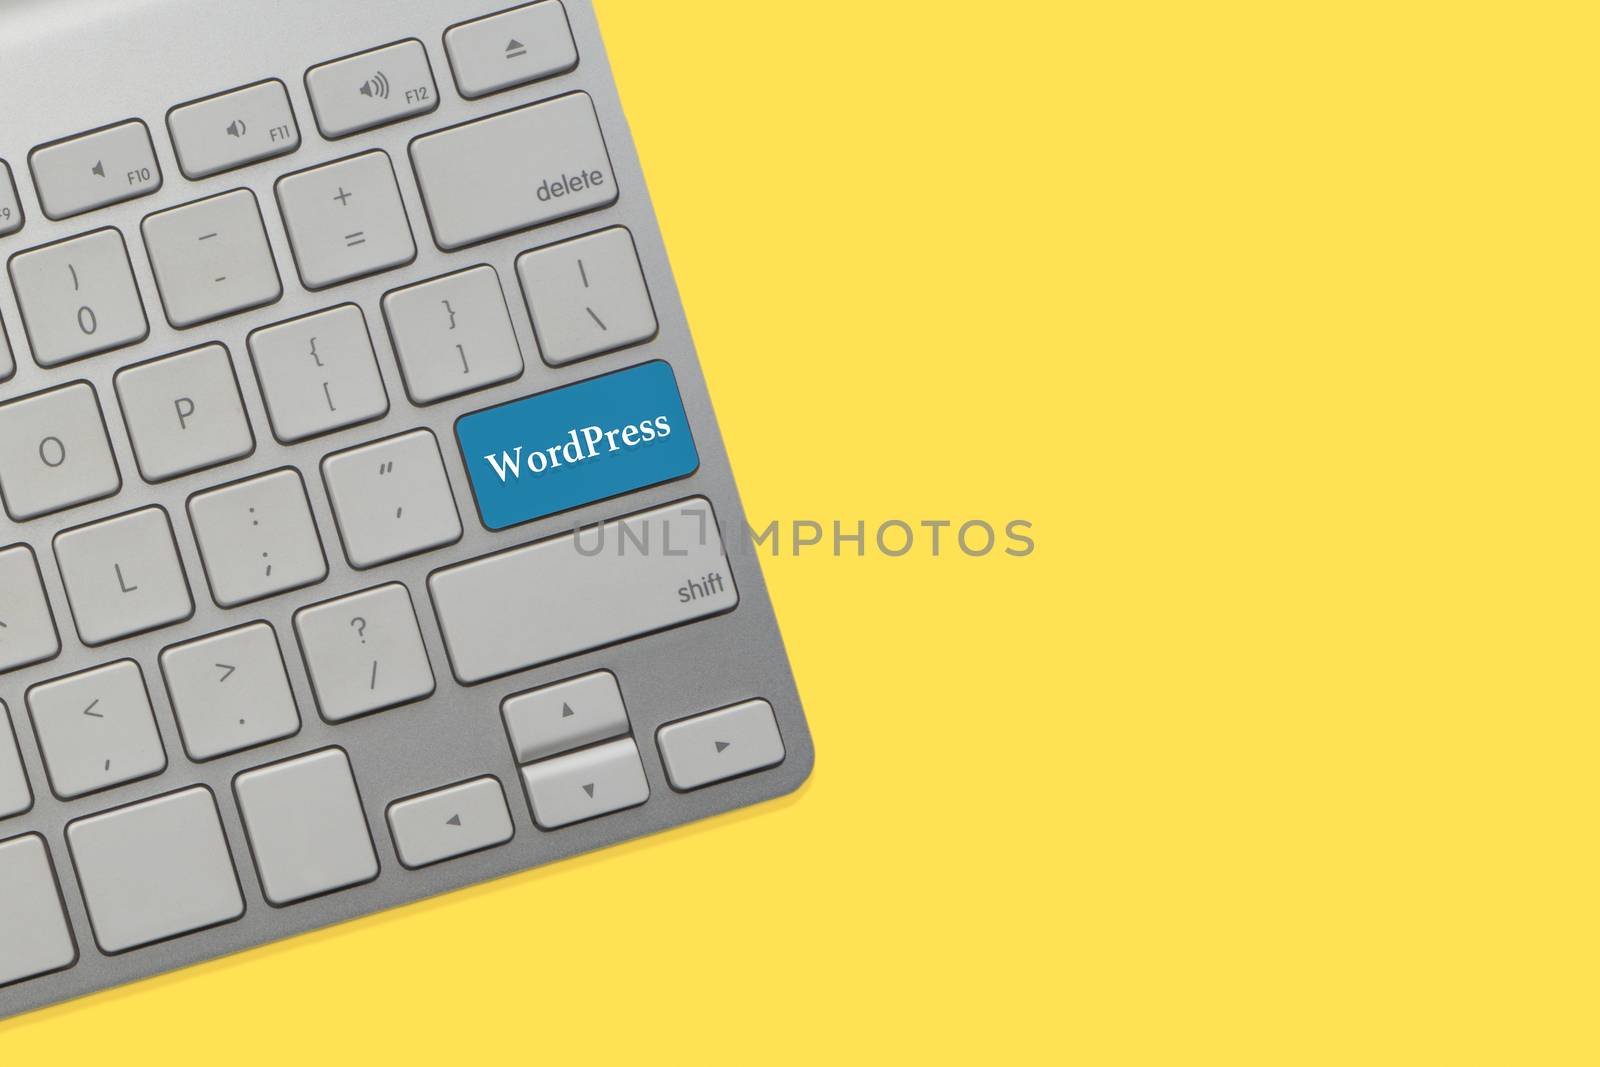 WORDPRESS text on keyboard over yellow background. Business and technology concept by silverwings